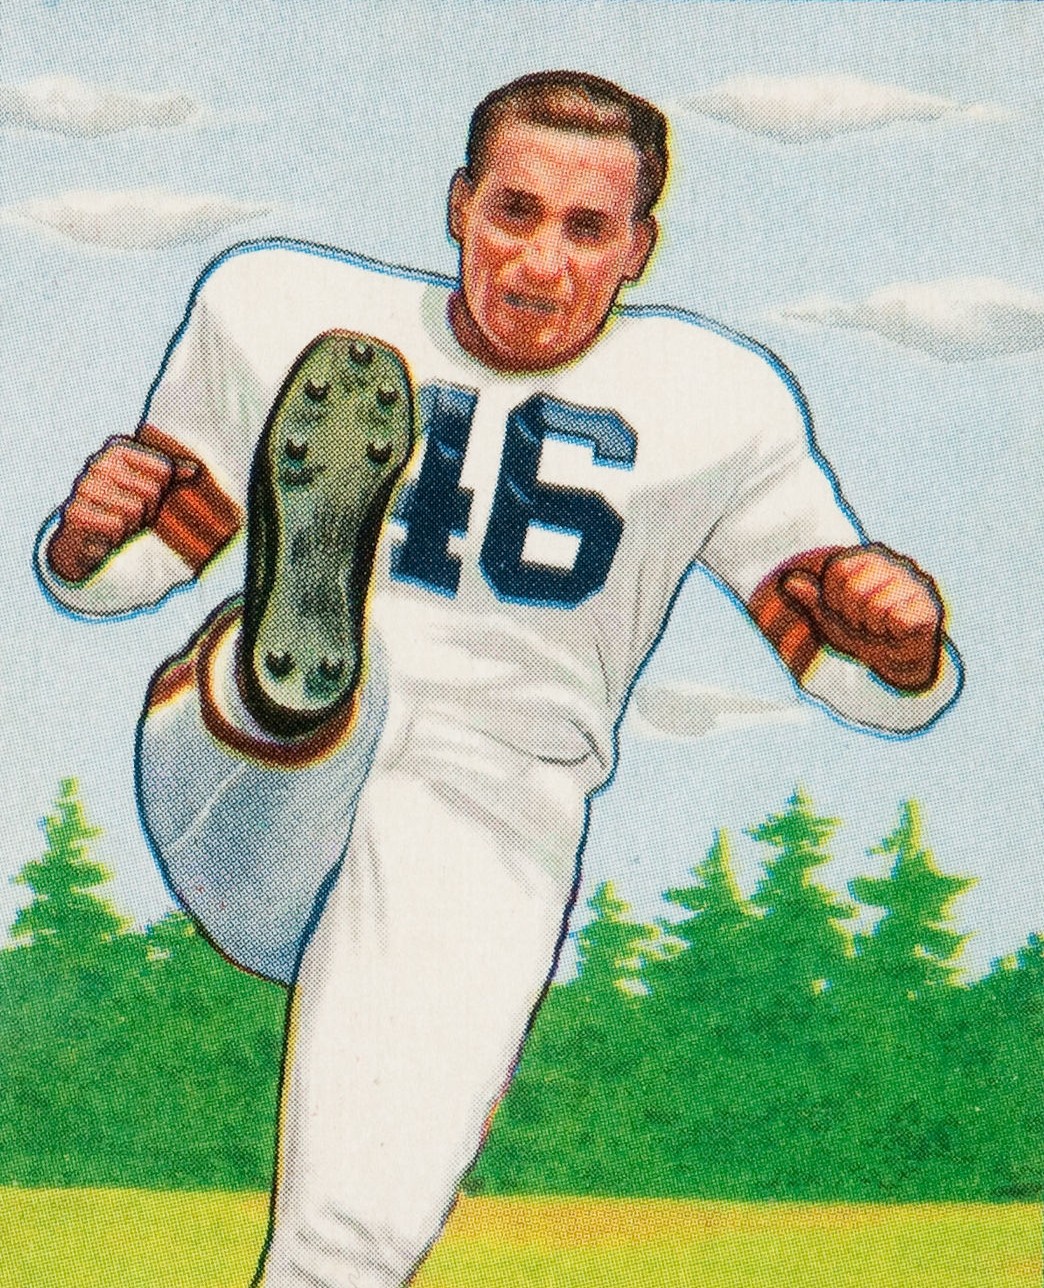 Lou Groza pictured kicking on a 1950 Bowman football card